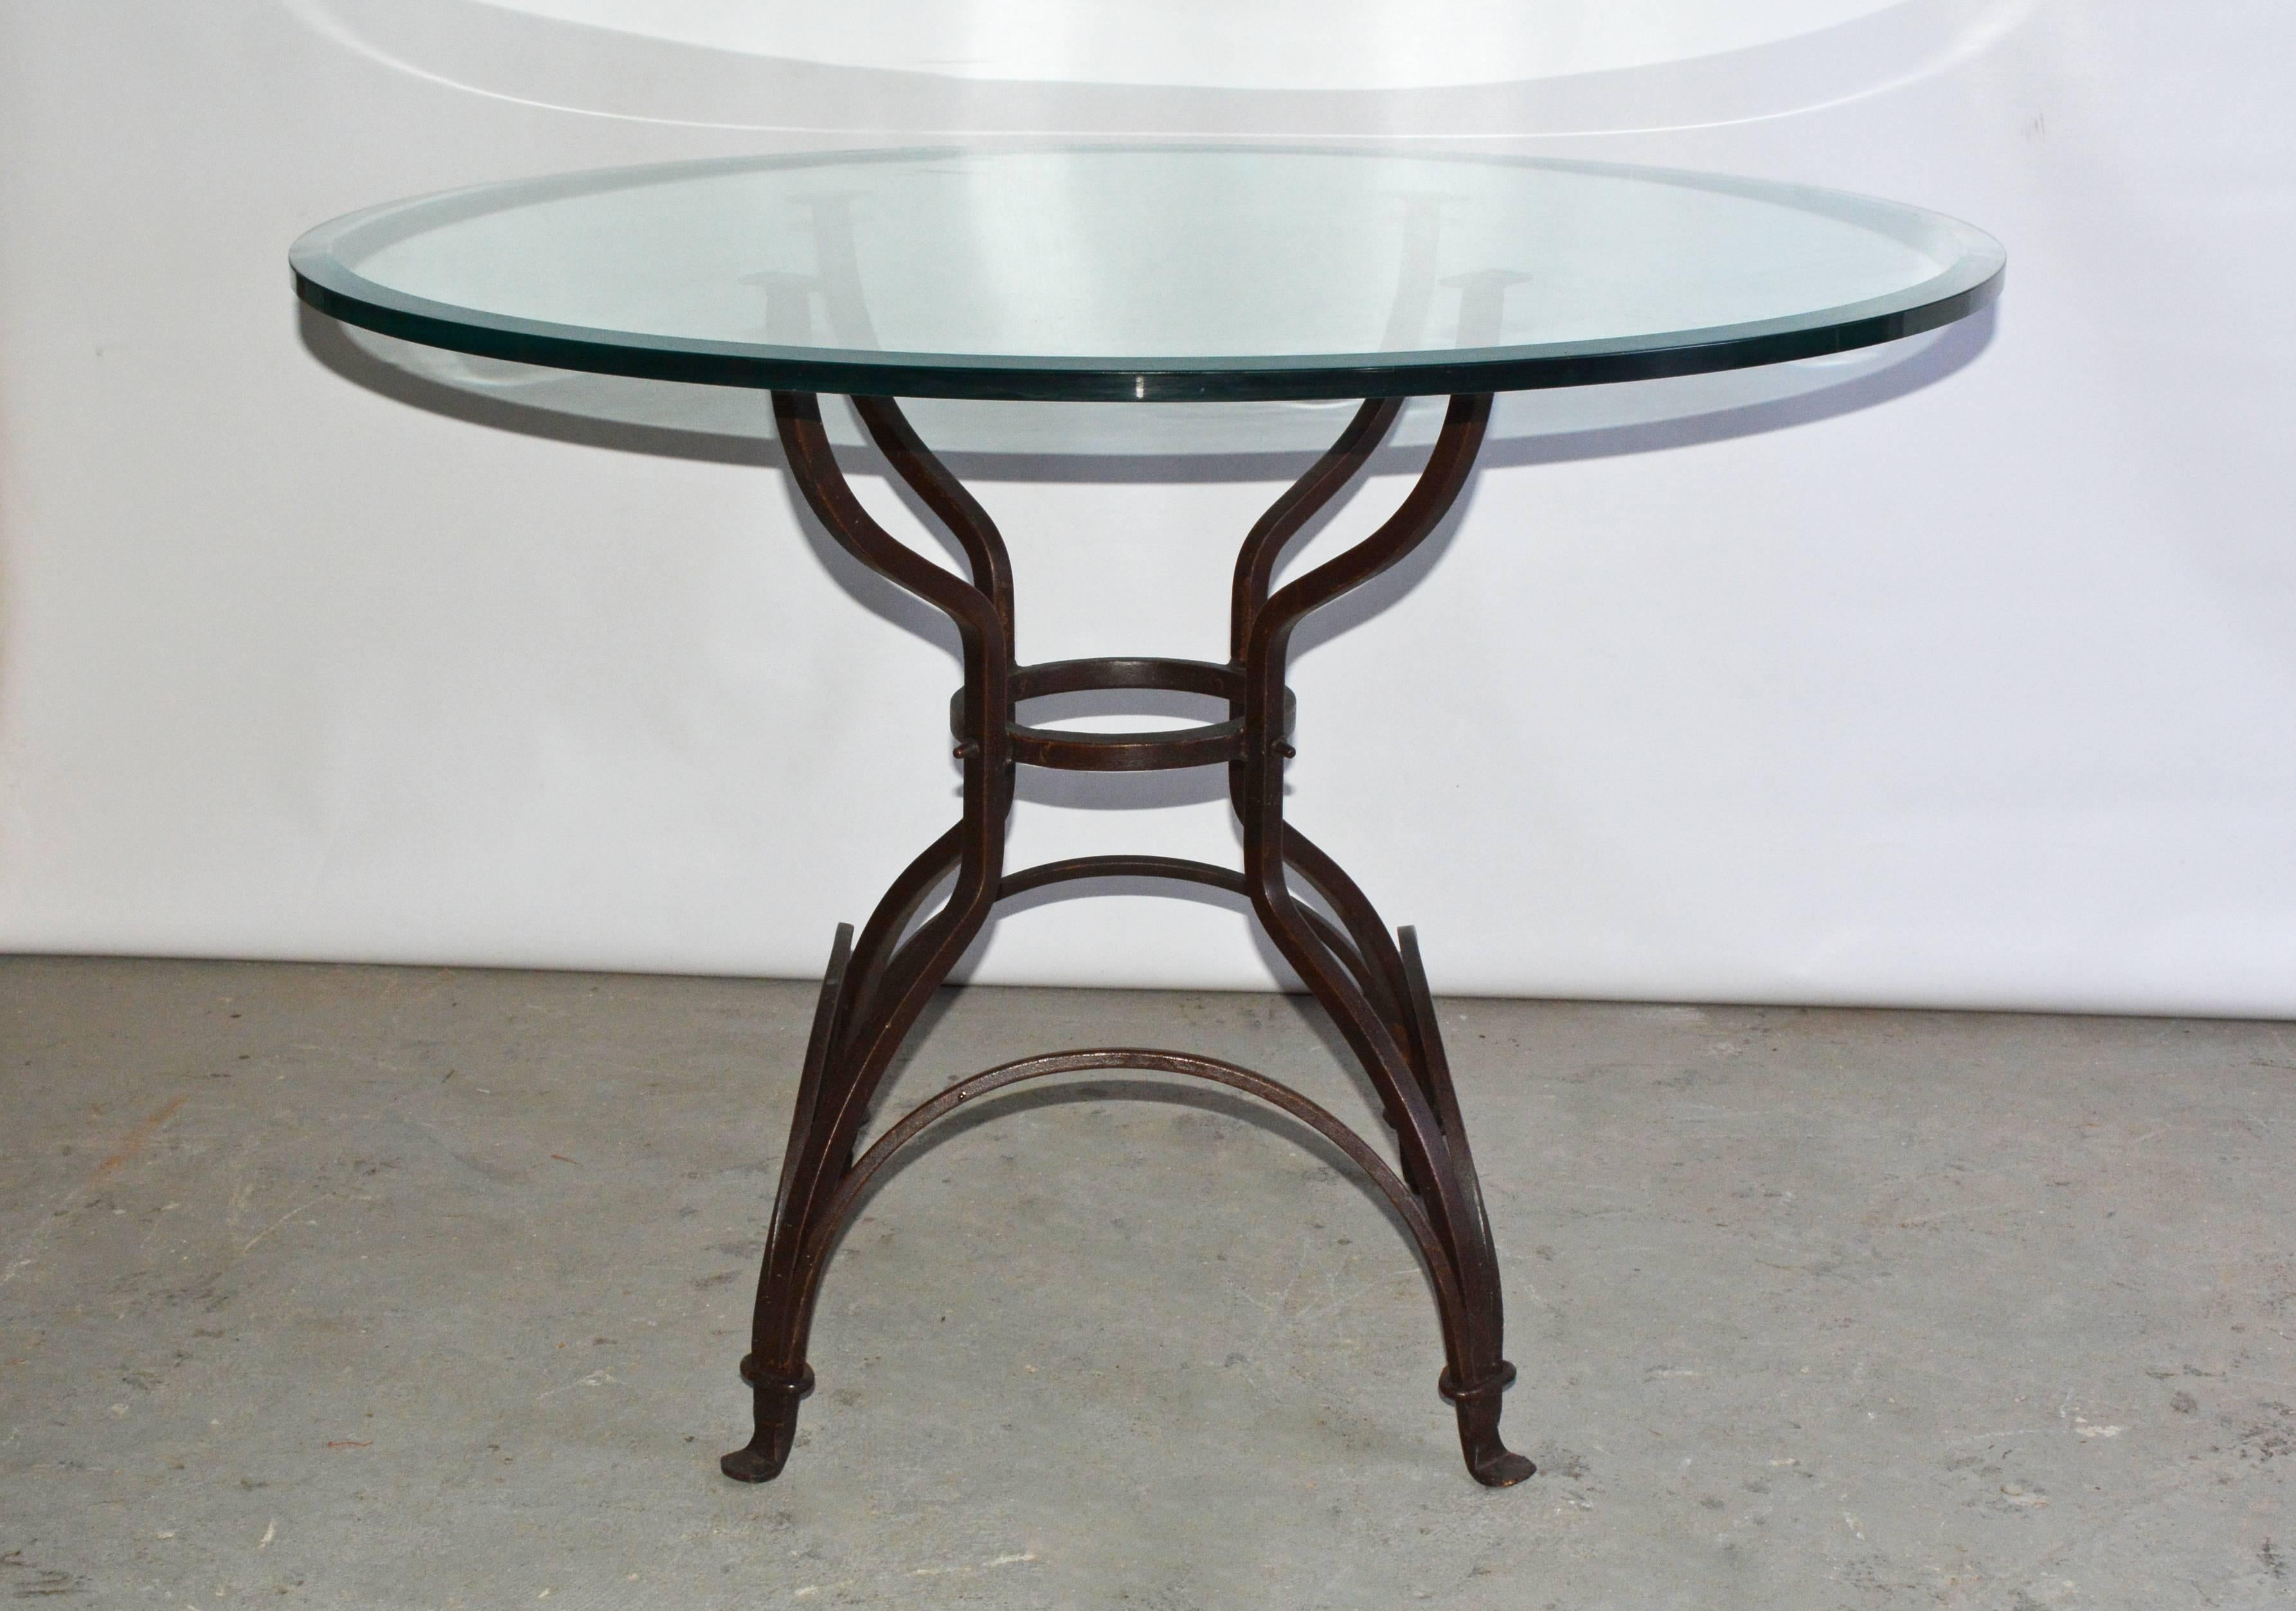 Indoor or outdoor iron metal base and glass top pedestal dining or breakfast table. Top and base can be sold separately. Top 300, base $1300
Base can support stone, glass or wood.
Base dimensions: 24 x 24 at the top, 28 x 28 at the bottom, 29